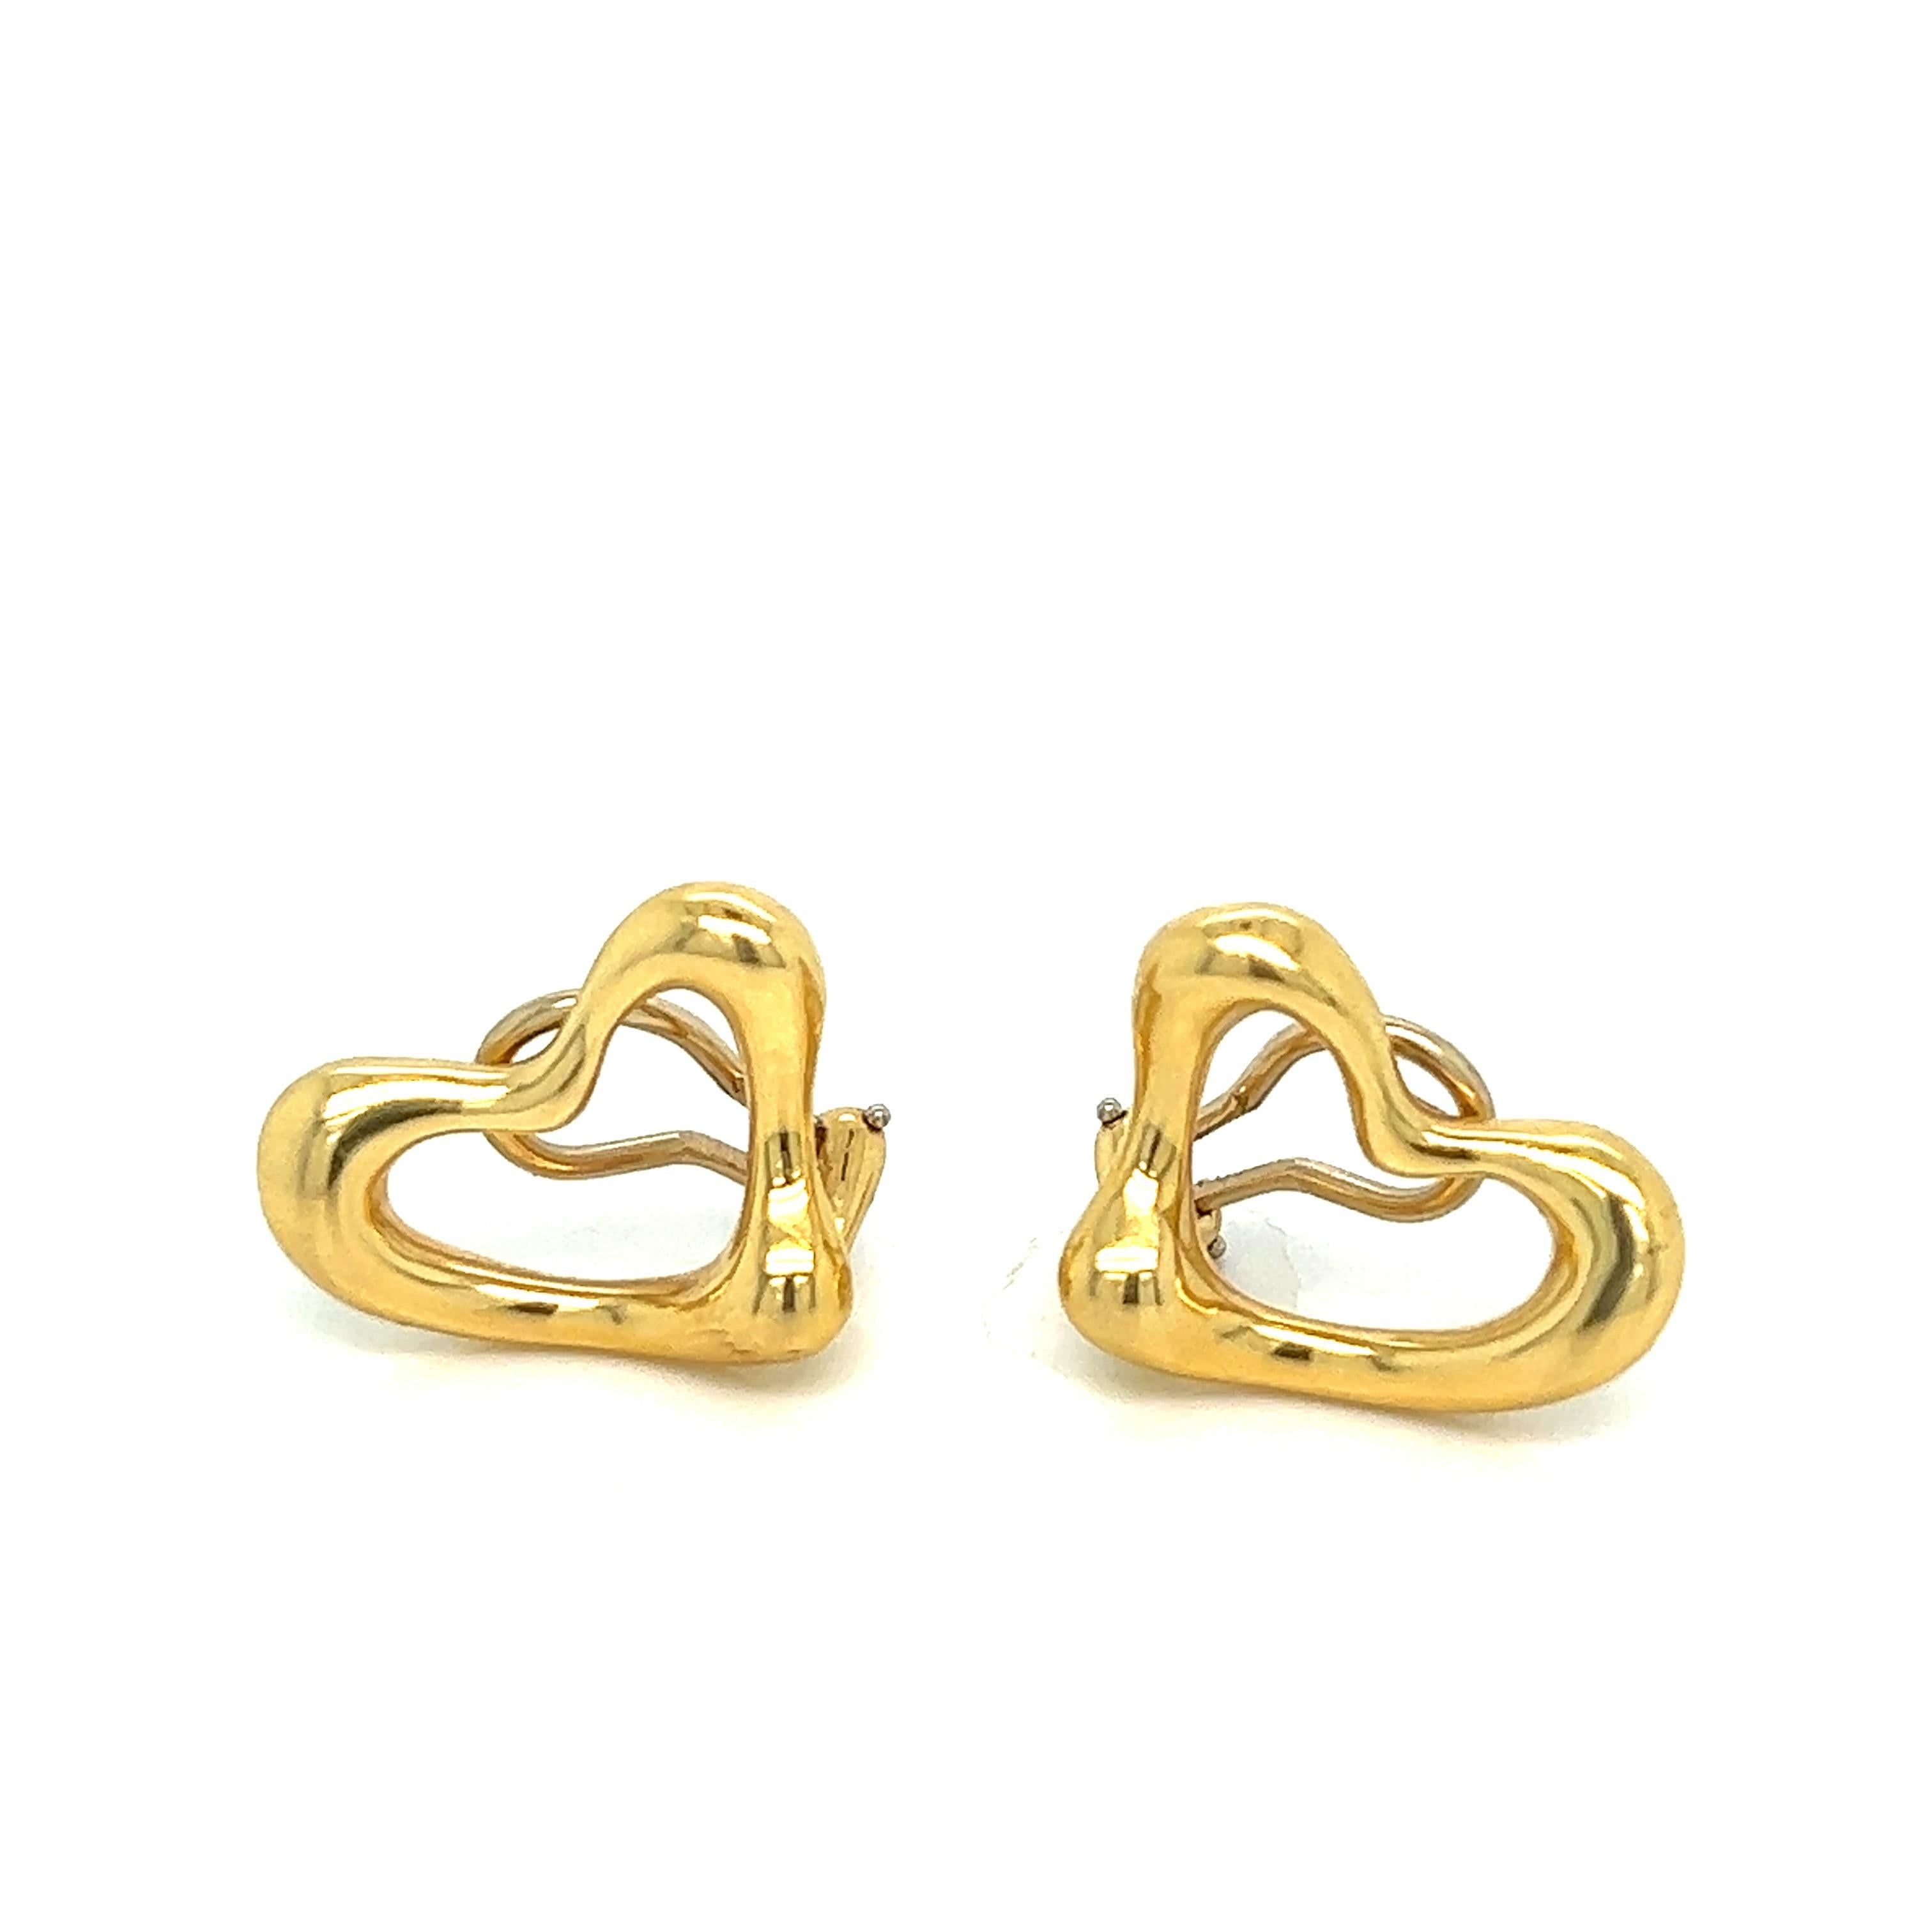 Elsa Peretti for Tiffany & Co. gold heart ear clips

Heart shaped, 18 karat yellow gold; marked Tiffany & Co., Peretti, 18kt

Size: width 2.1 cm, length 2 cm
Total weight: 16.2 grams